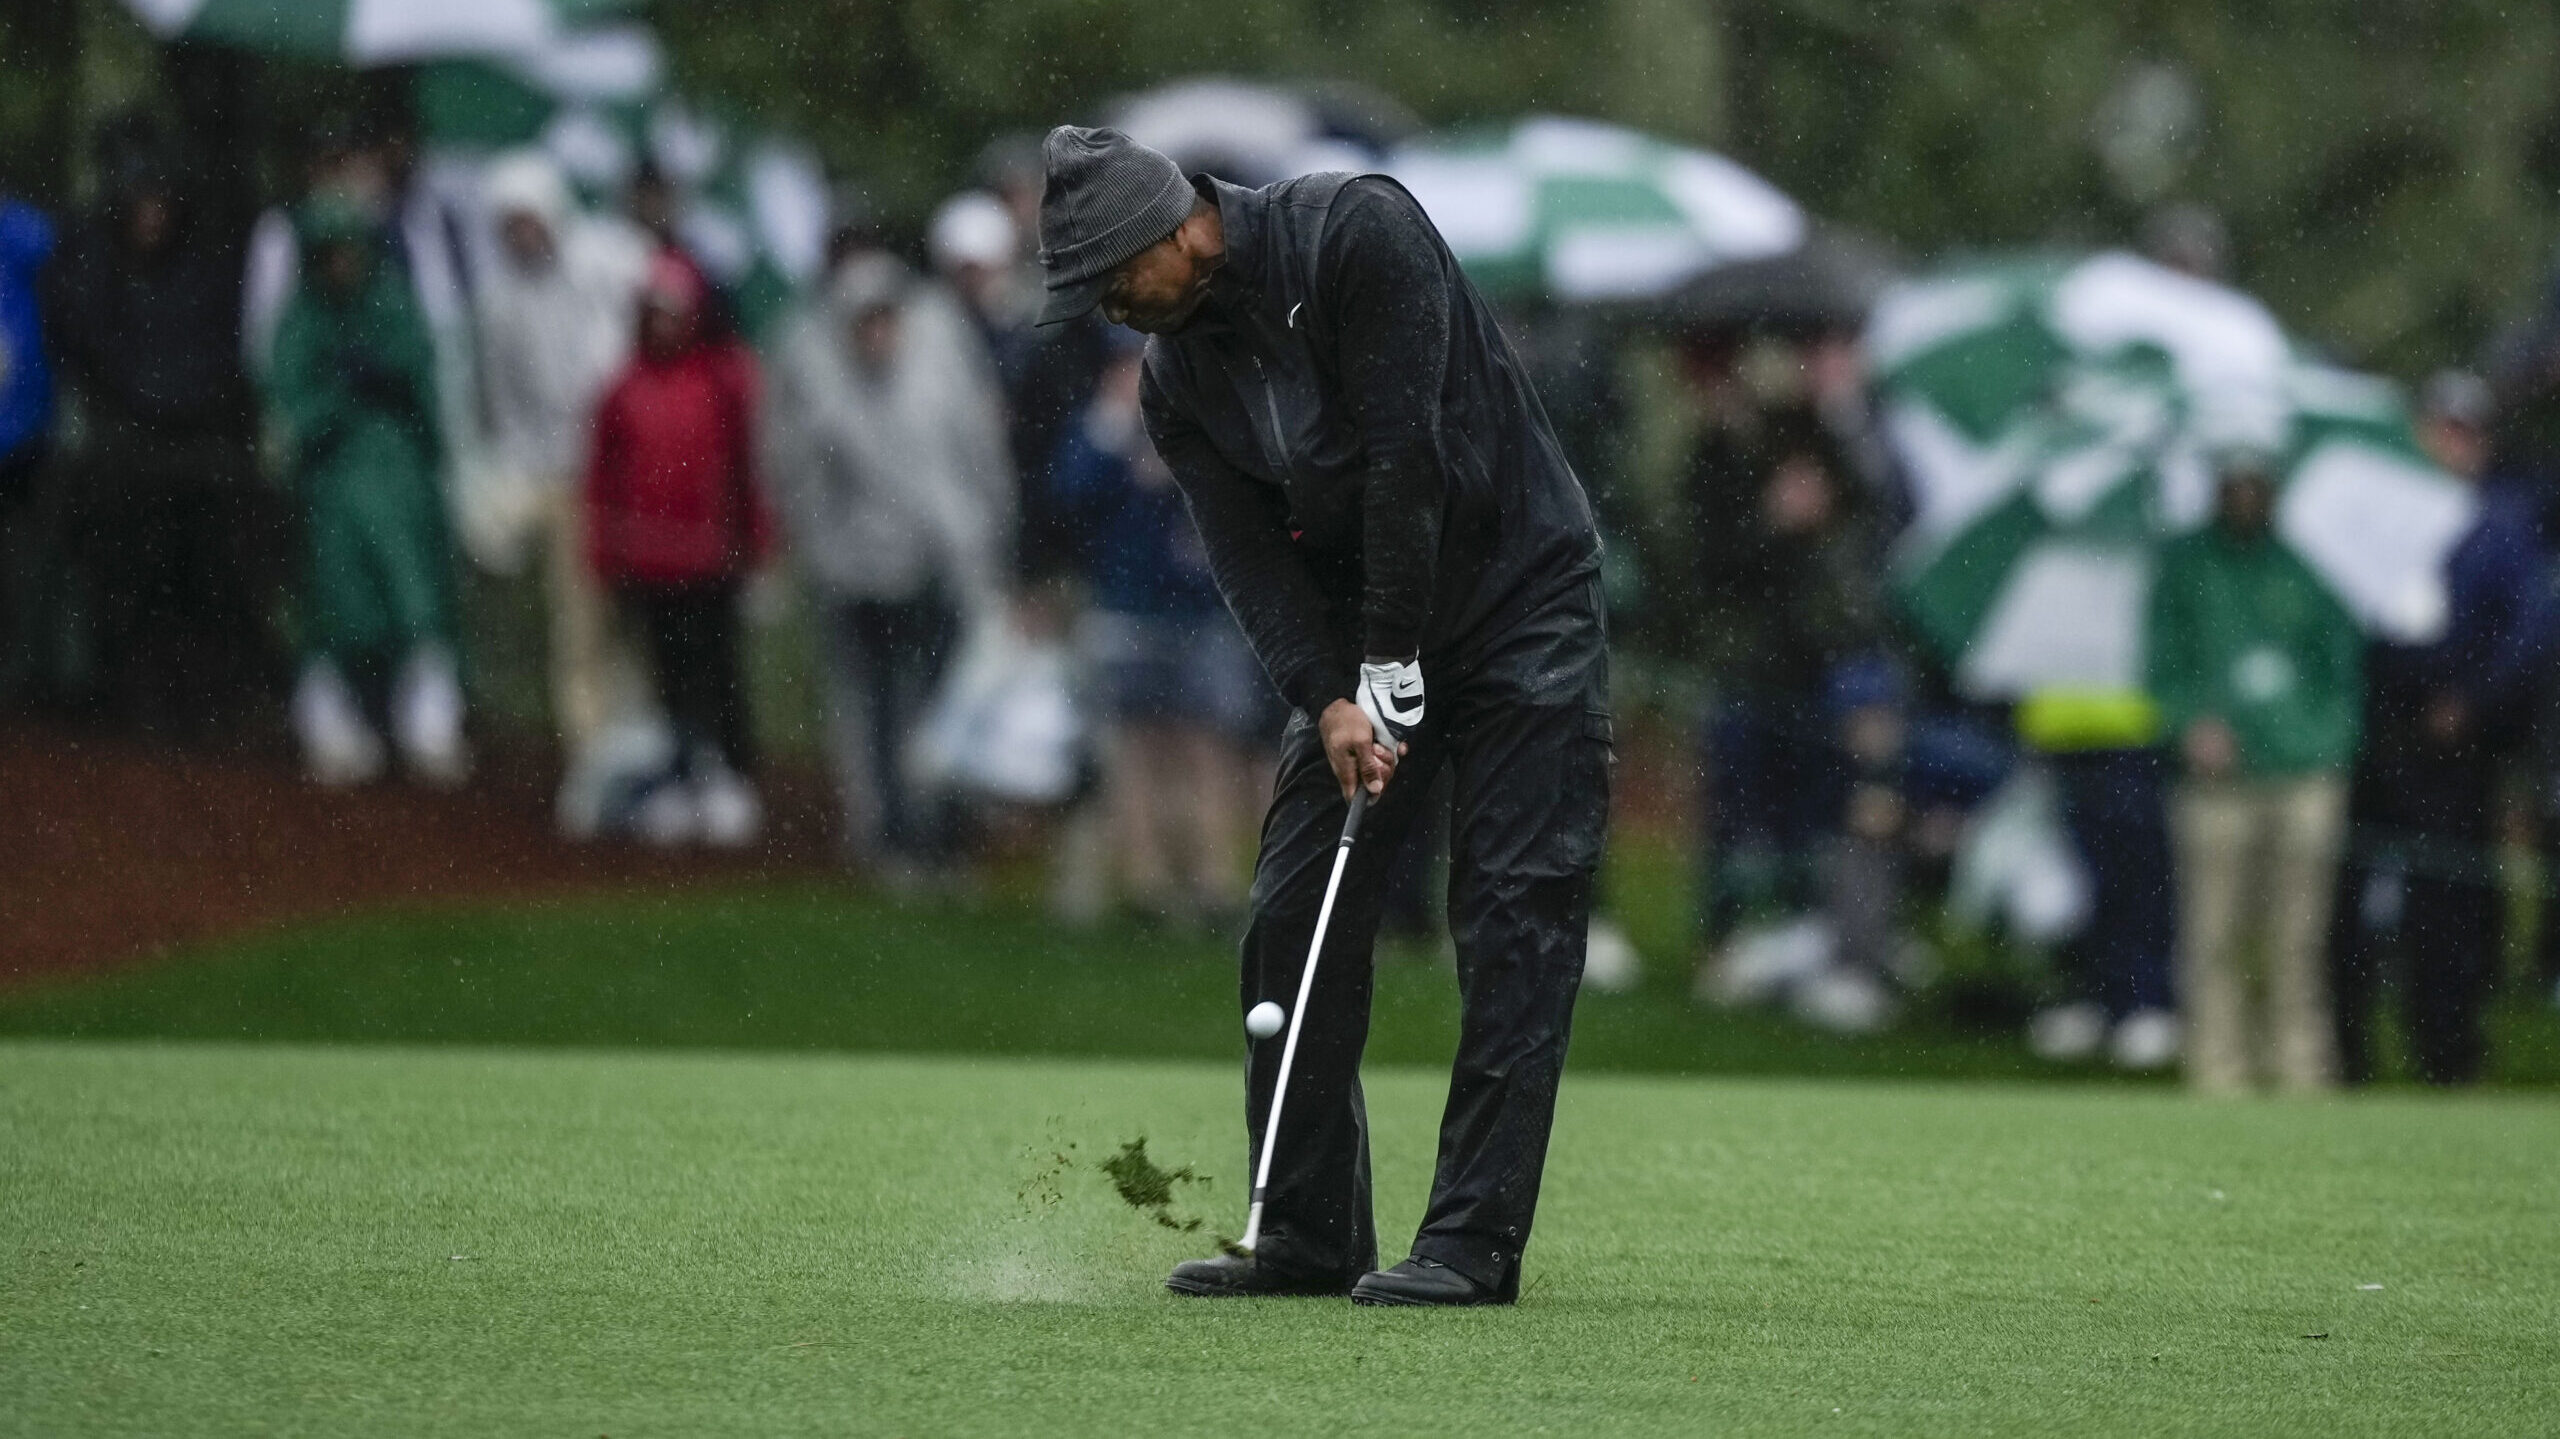 Tiger Woods hits from the fairway on the 15th hole during the weather delayed third round of the Ma...